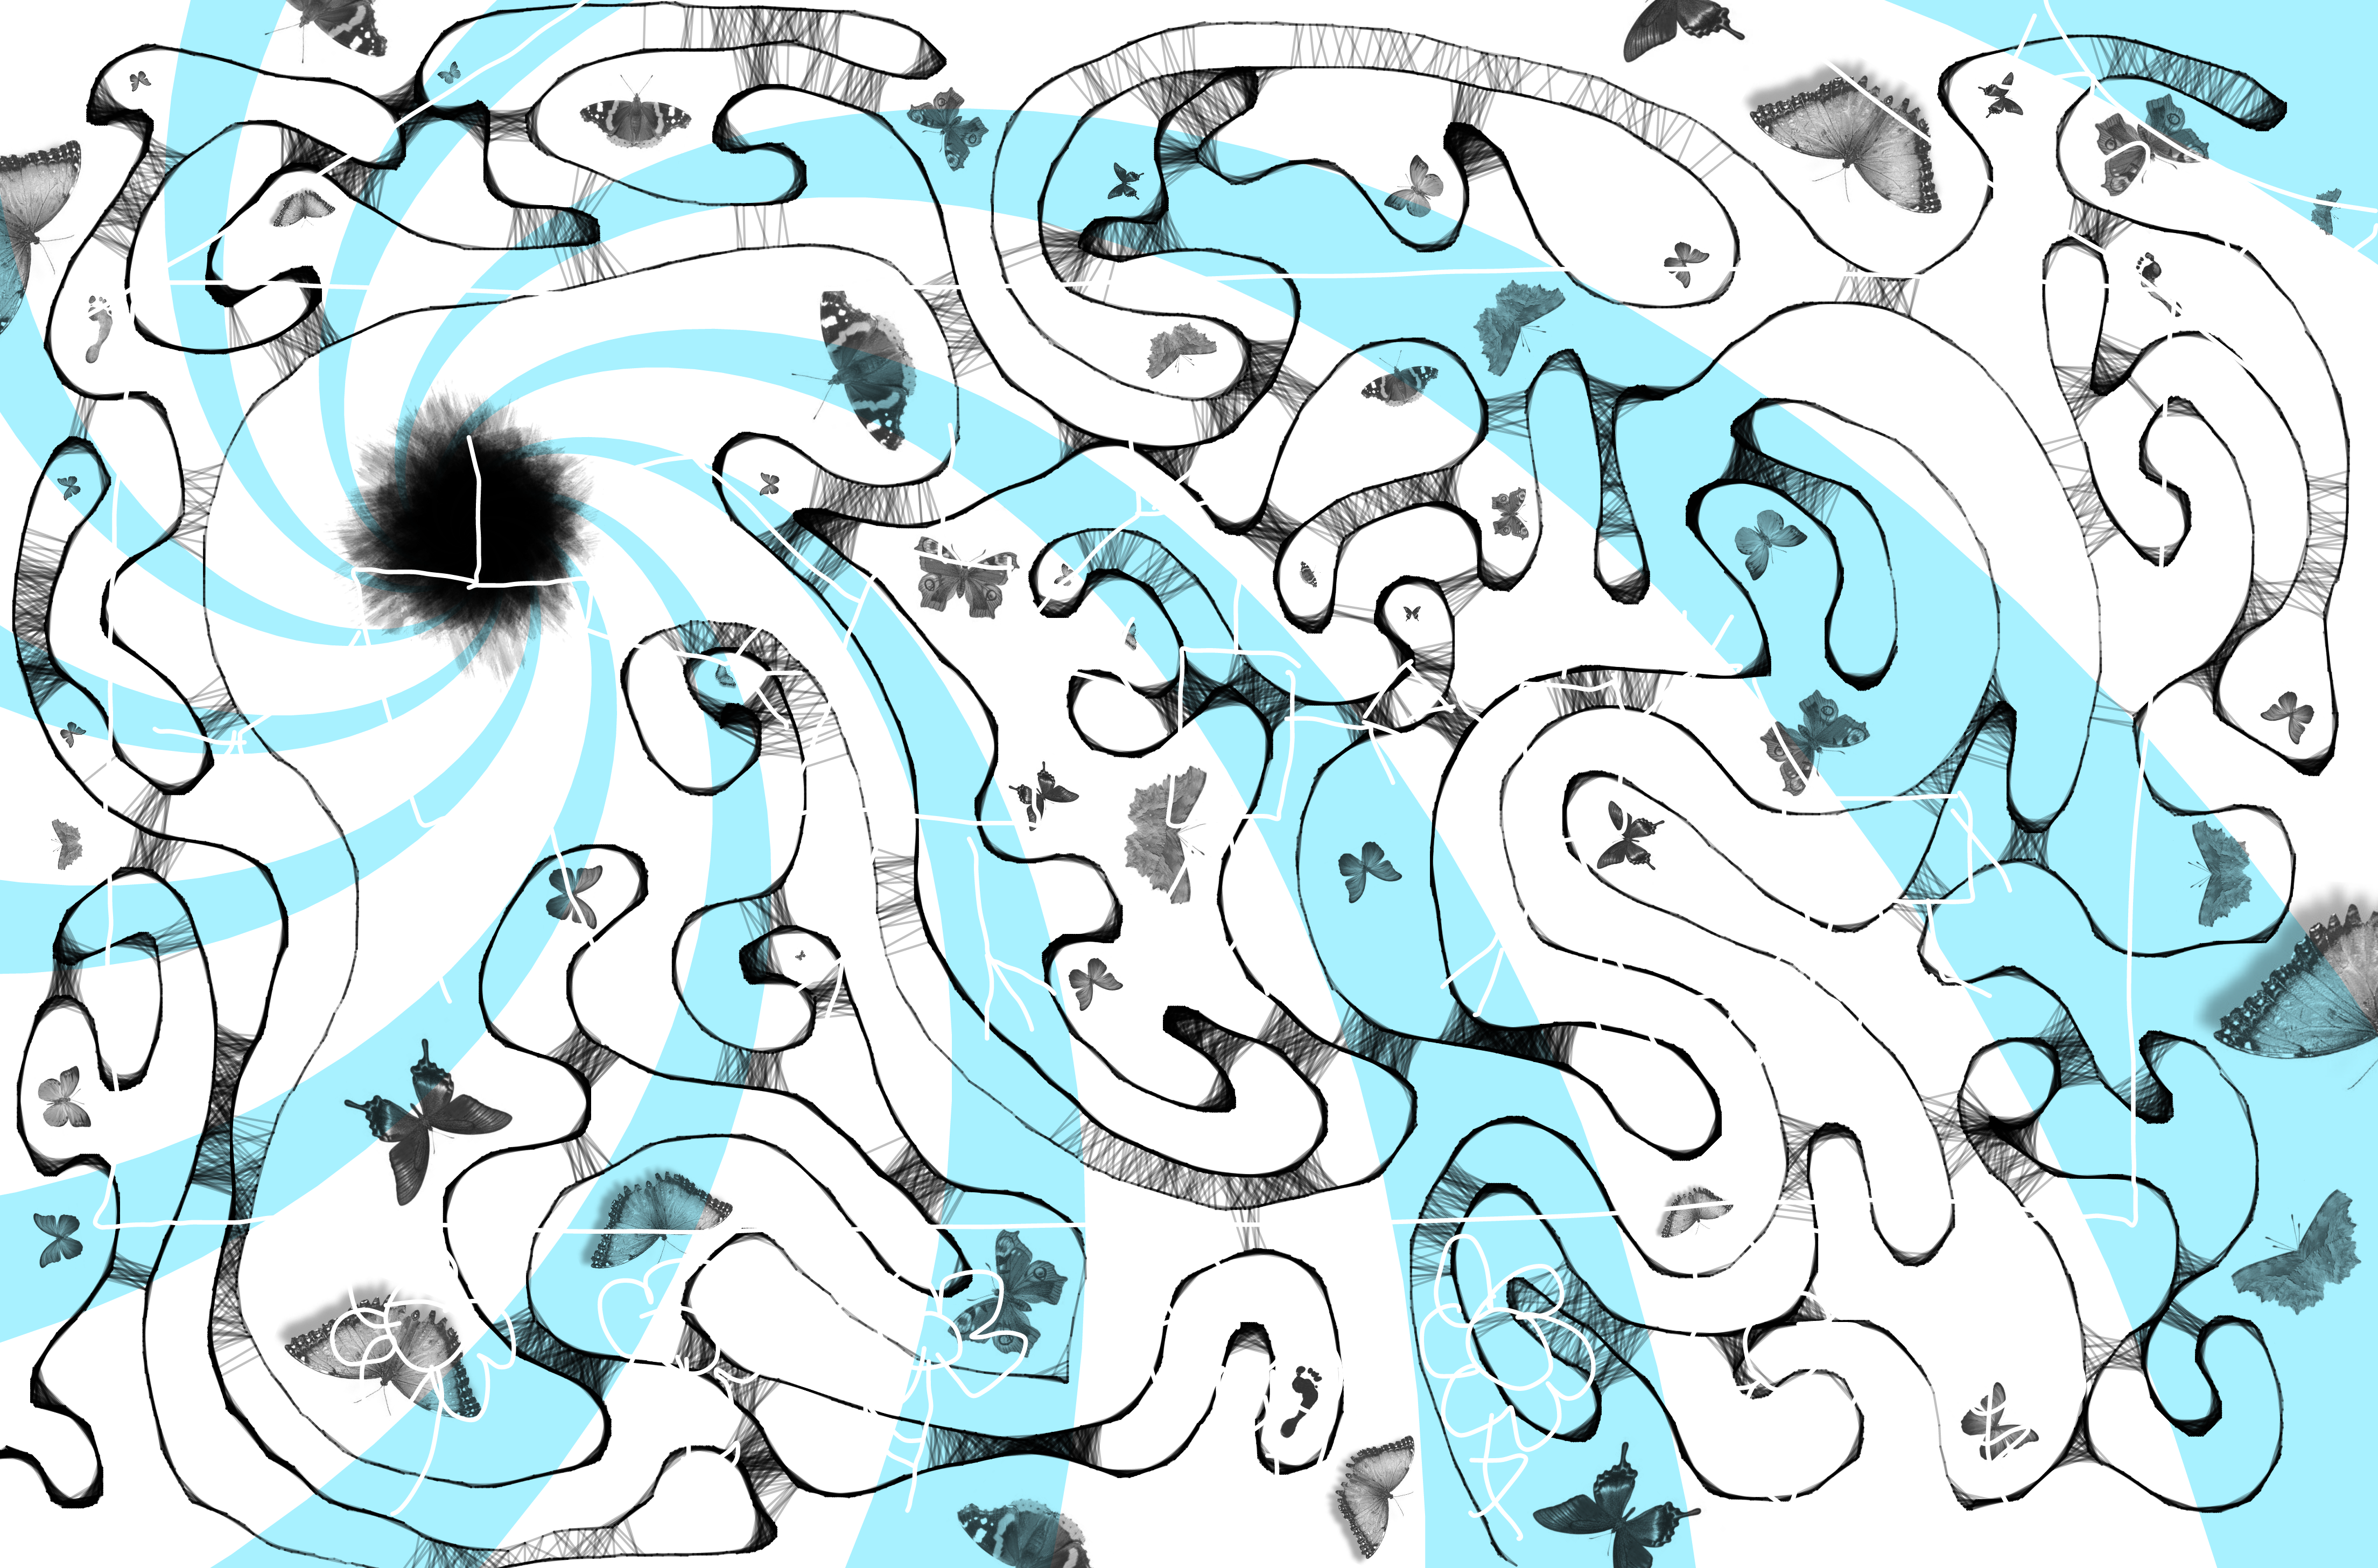 Digital artwork in black, white, and blue. The background is comprised of a whirl pattern underneath abstract black shapes and stamps of butterflies. Above them is a crude drawing, reminiscent of one made by a child, of white lines drawing a house, a sun, and flowers. Inside the house is a group of five stick figures: two larger figures, two smaller figures, and one quadruped figure. None of the figures have heads.